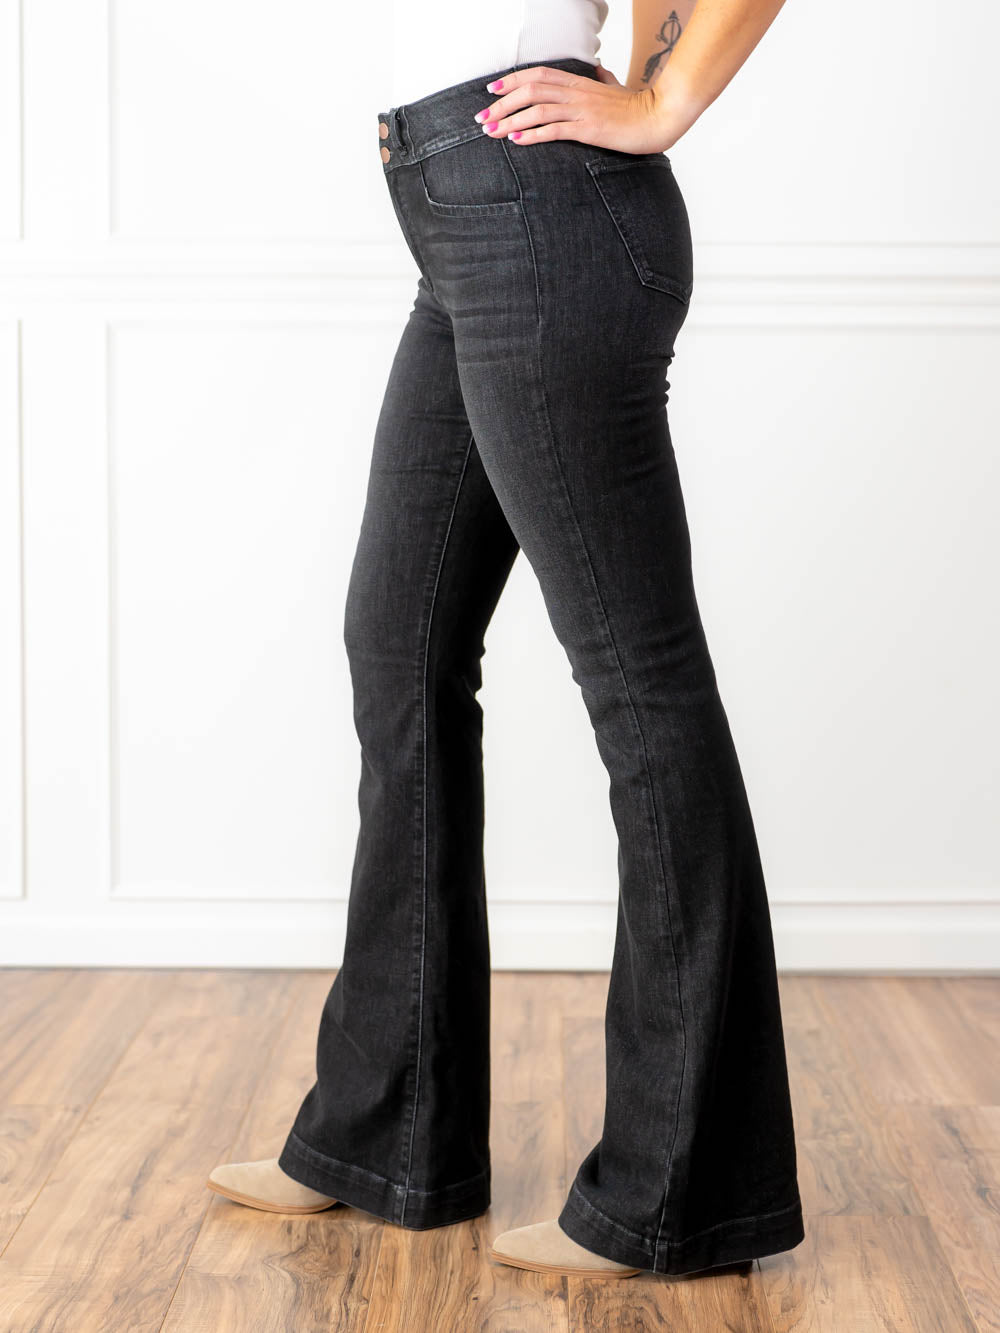 Flare Jeans for Tall Women